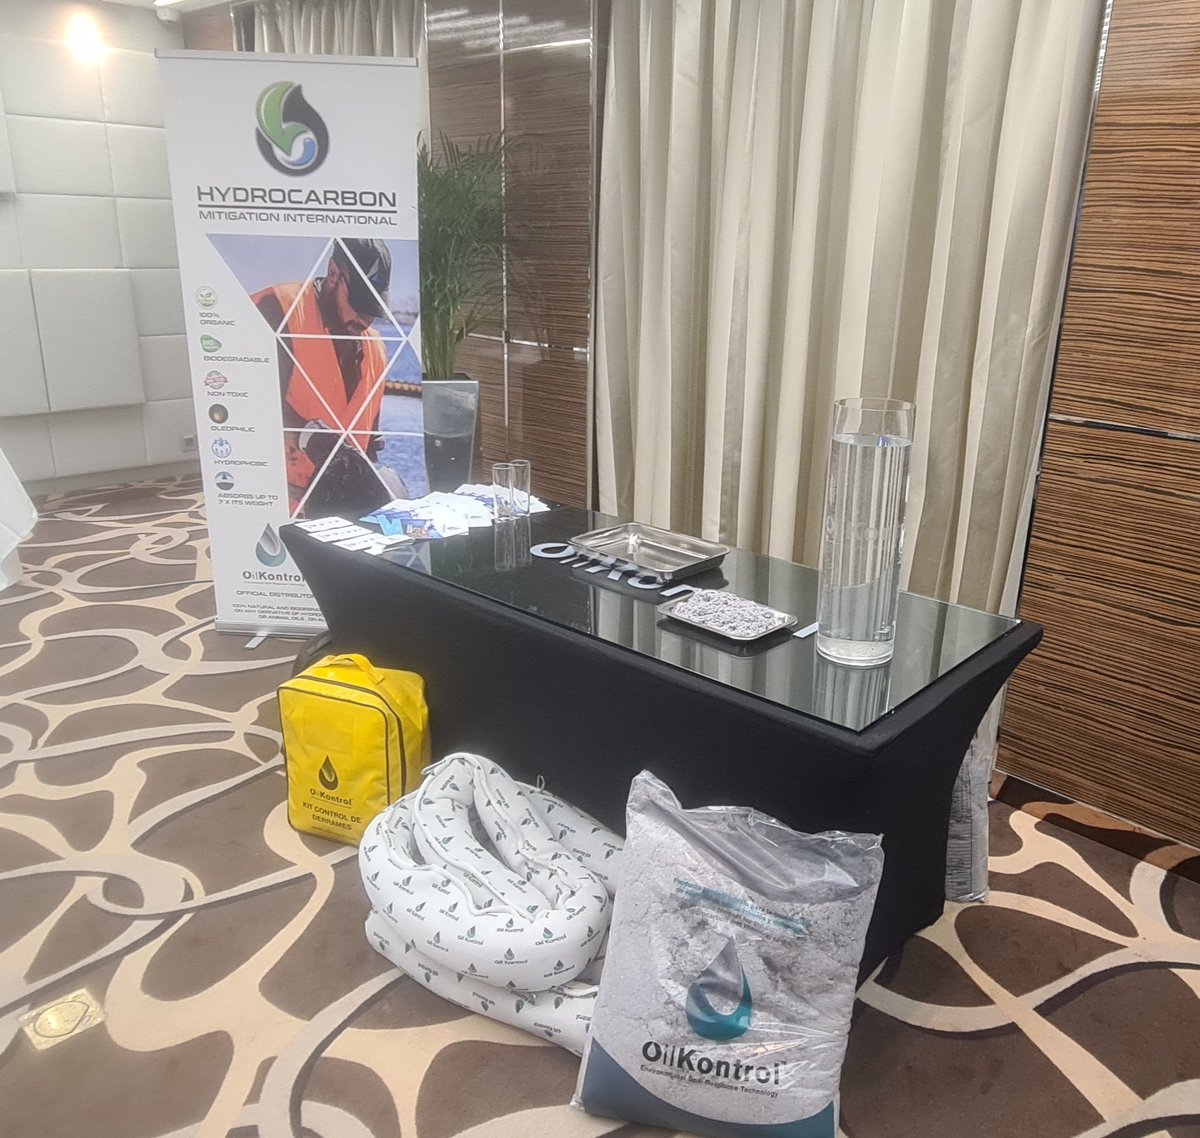 Today we officially launched our 100% Organic and biodegradable hydrocarbon recovery products at the Gibraltar Maritime Week. #OilKontrol @GibraltarGov @gibraltarport @Petrospot